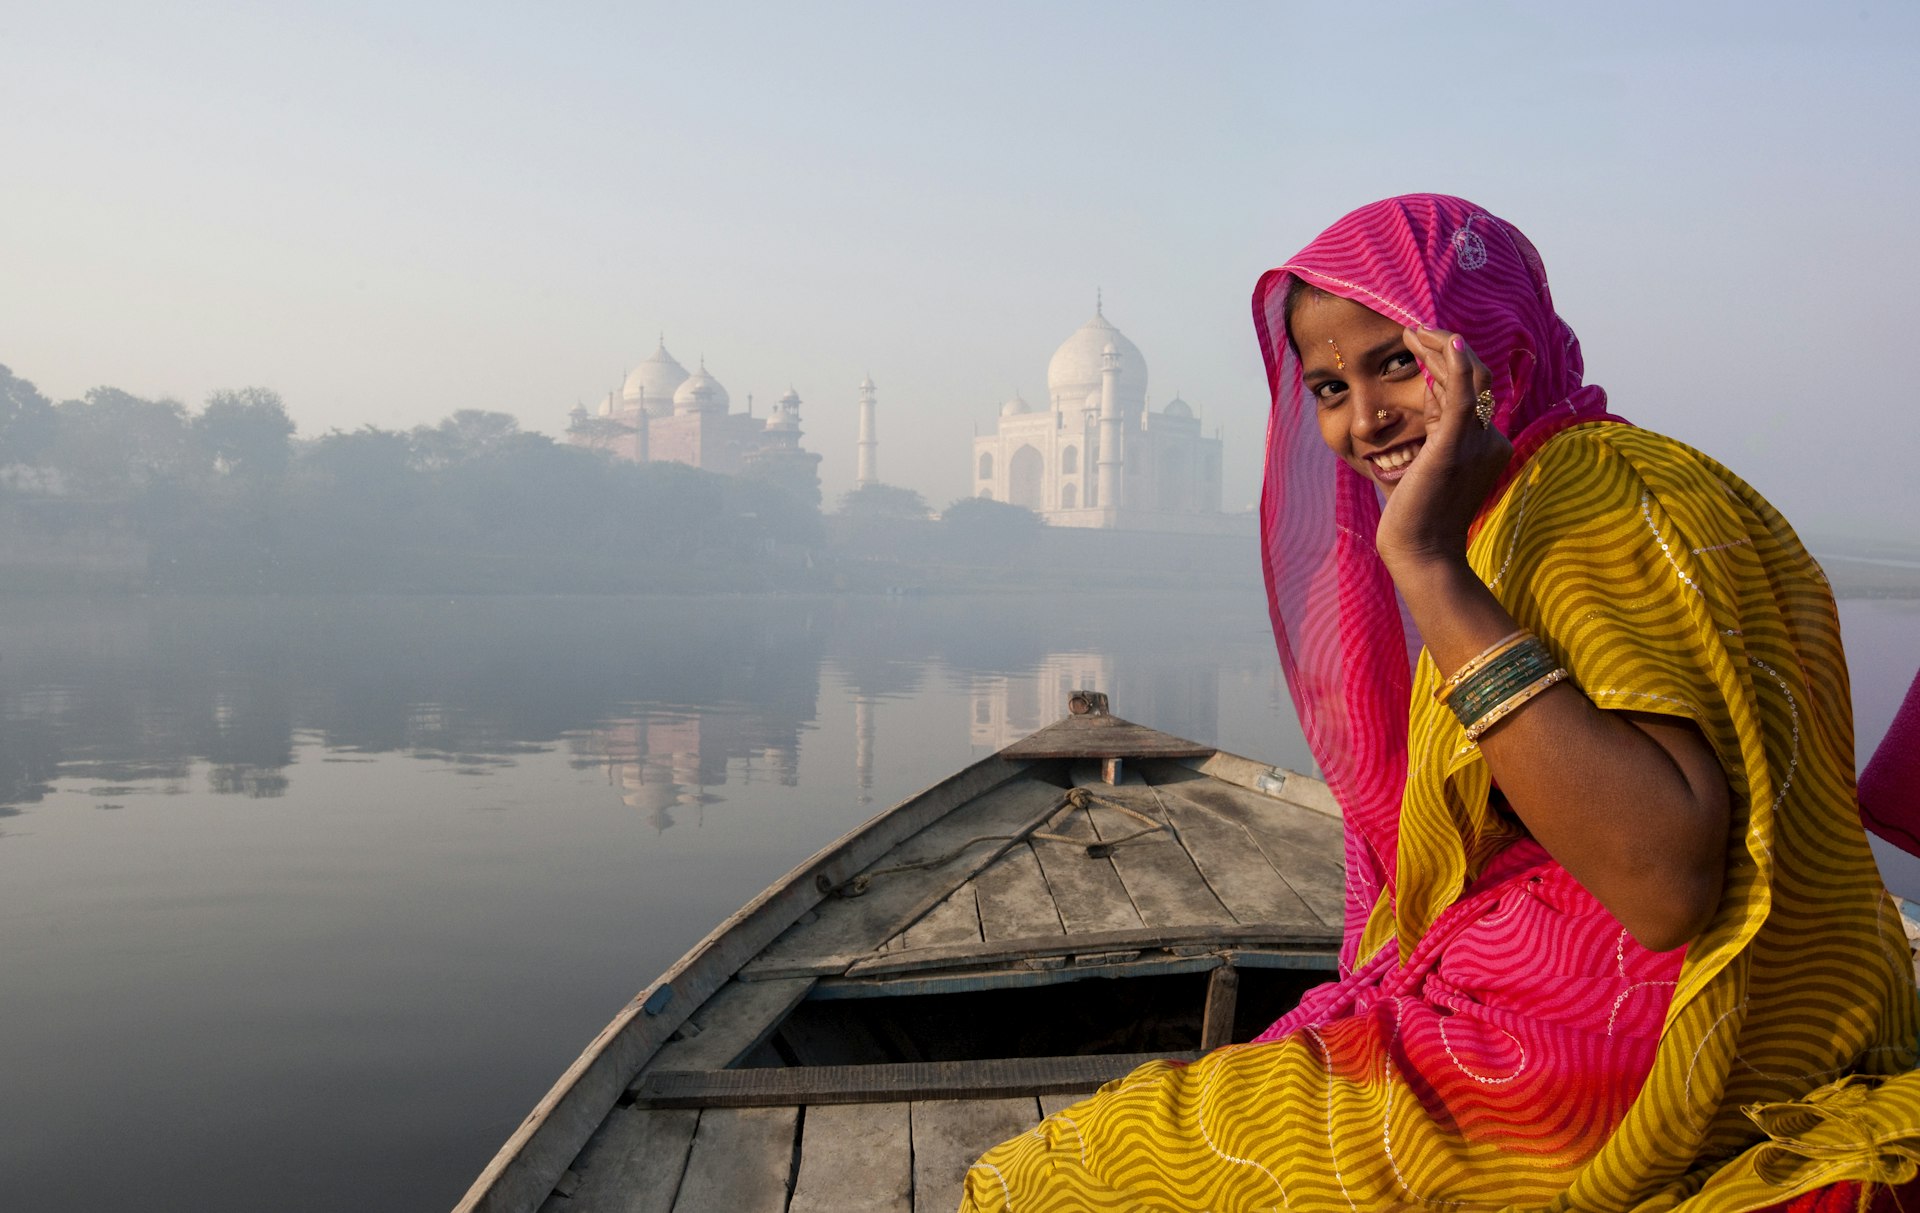 A woman in traditional Indian dress smiles as she rides in a boat towards the epic white marble Taj Mahal